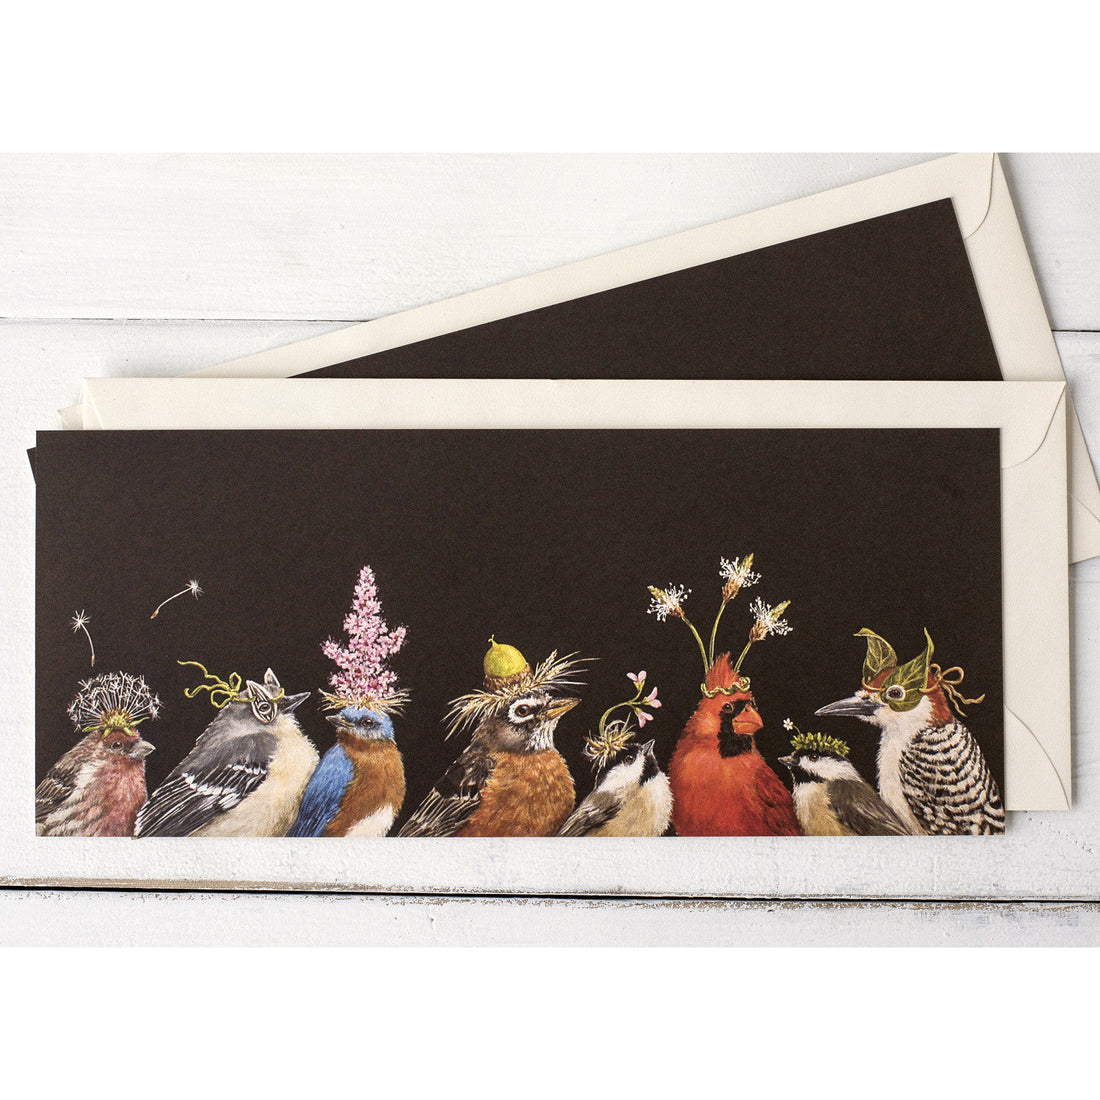 A row of colorful birds with leaves on their heads, featuring Hester &amp; Cook&